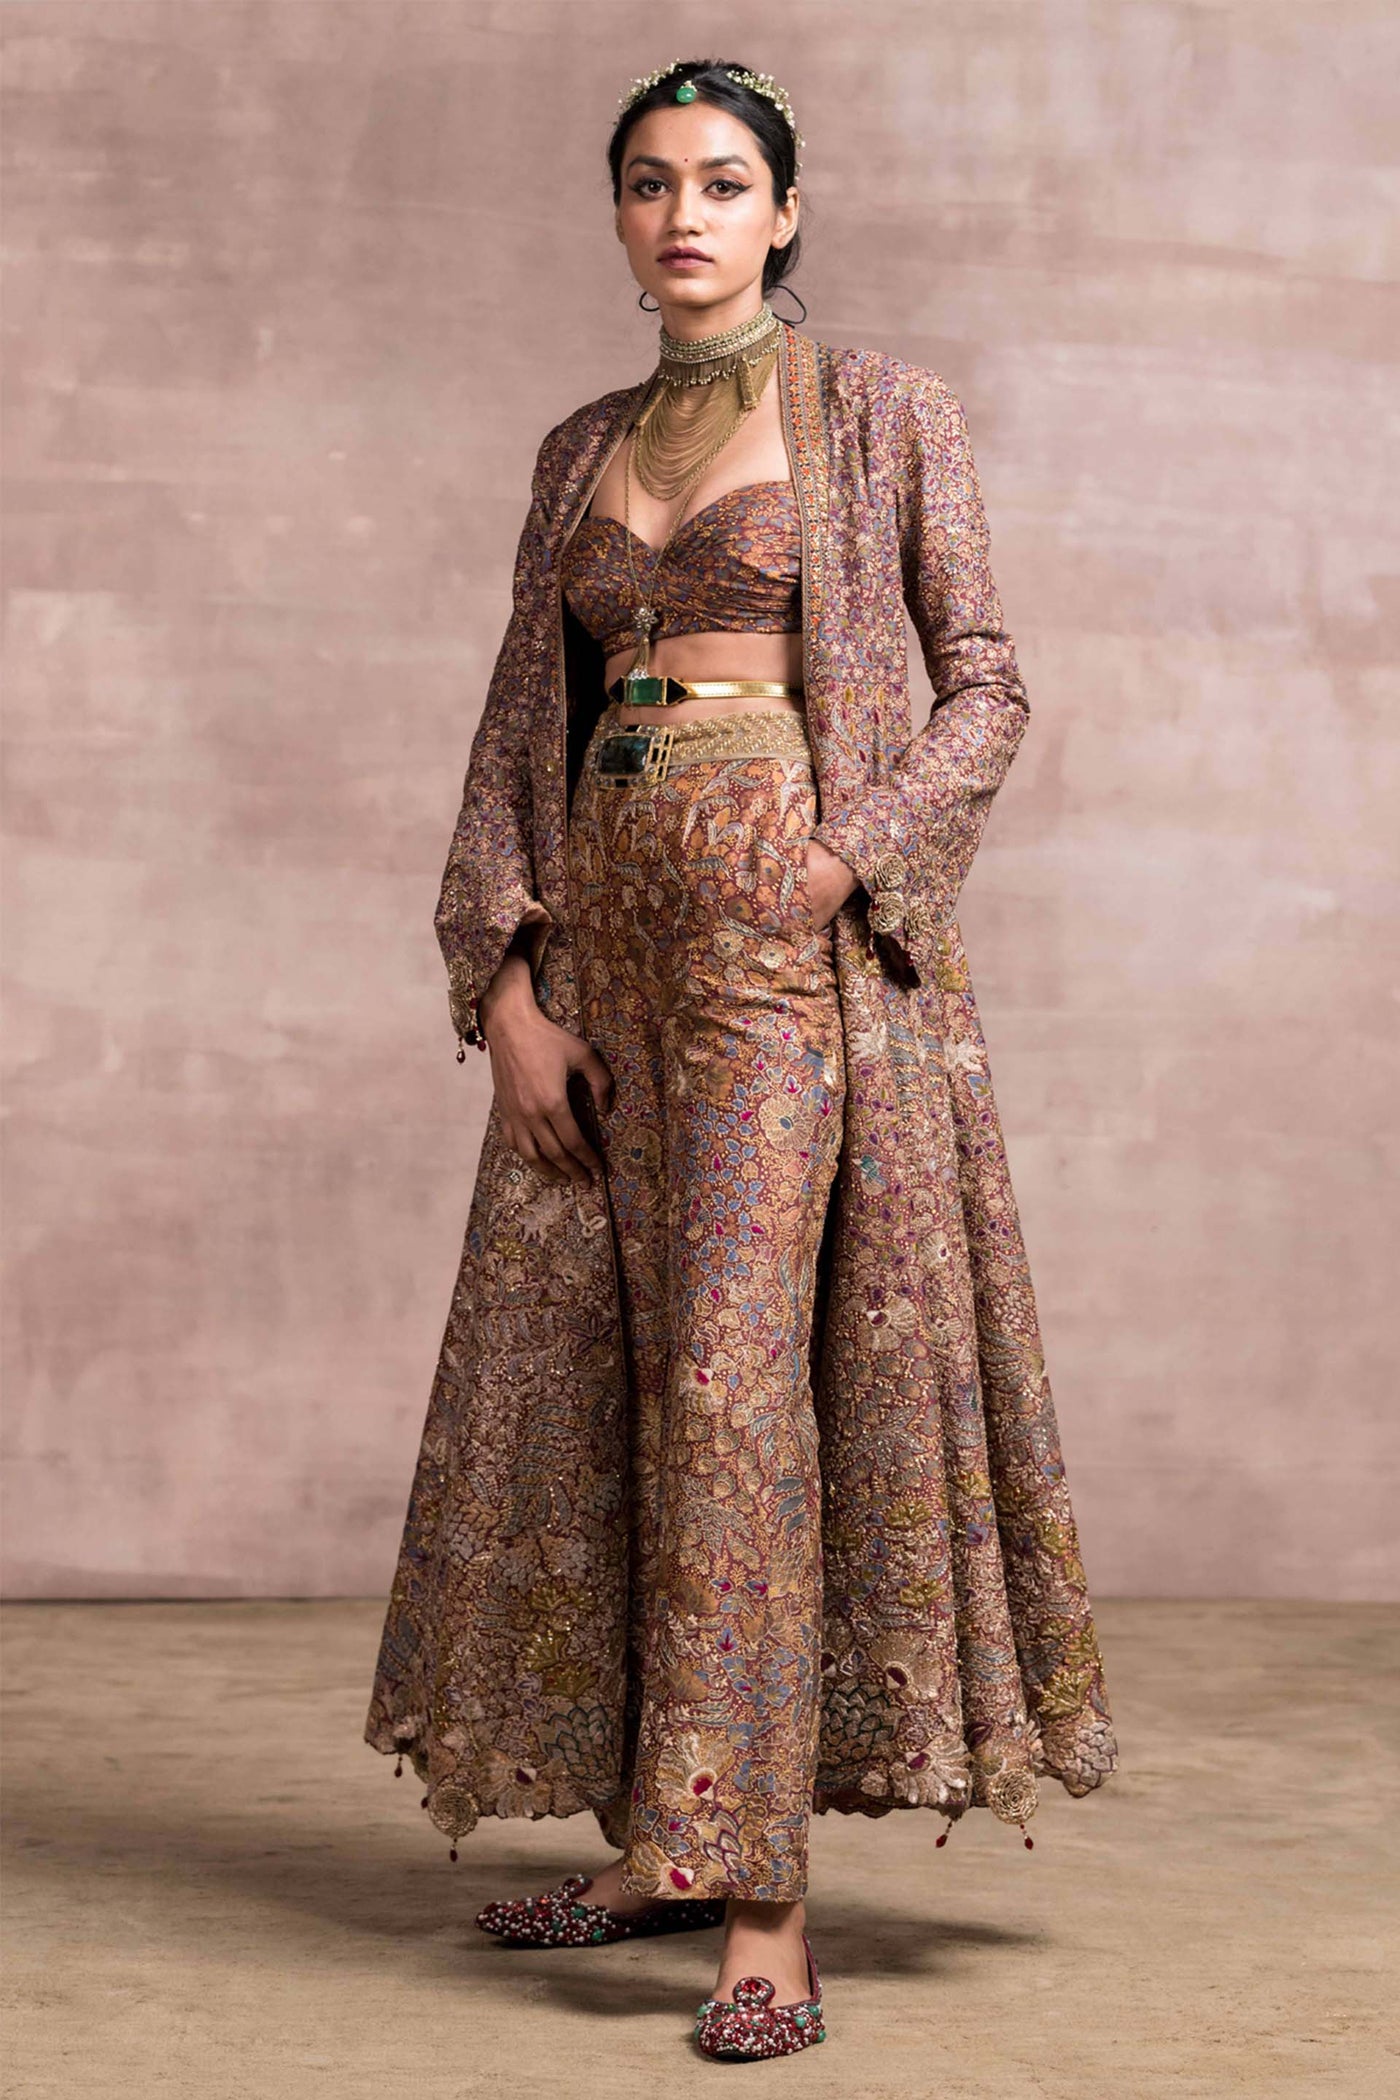 Tarun Tahiliani Embroidered Printed Jacket With Printed Bustier And Narrow Trousers burgundy indian designer bridal wedding wear online shopping melange singapore